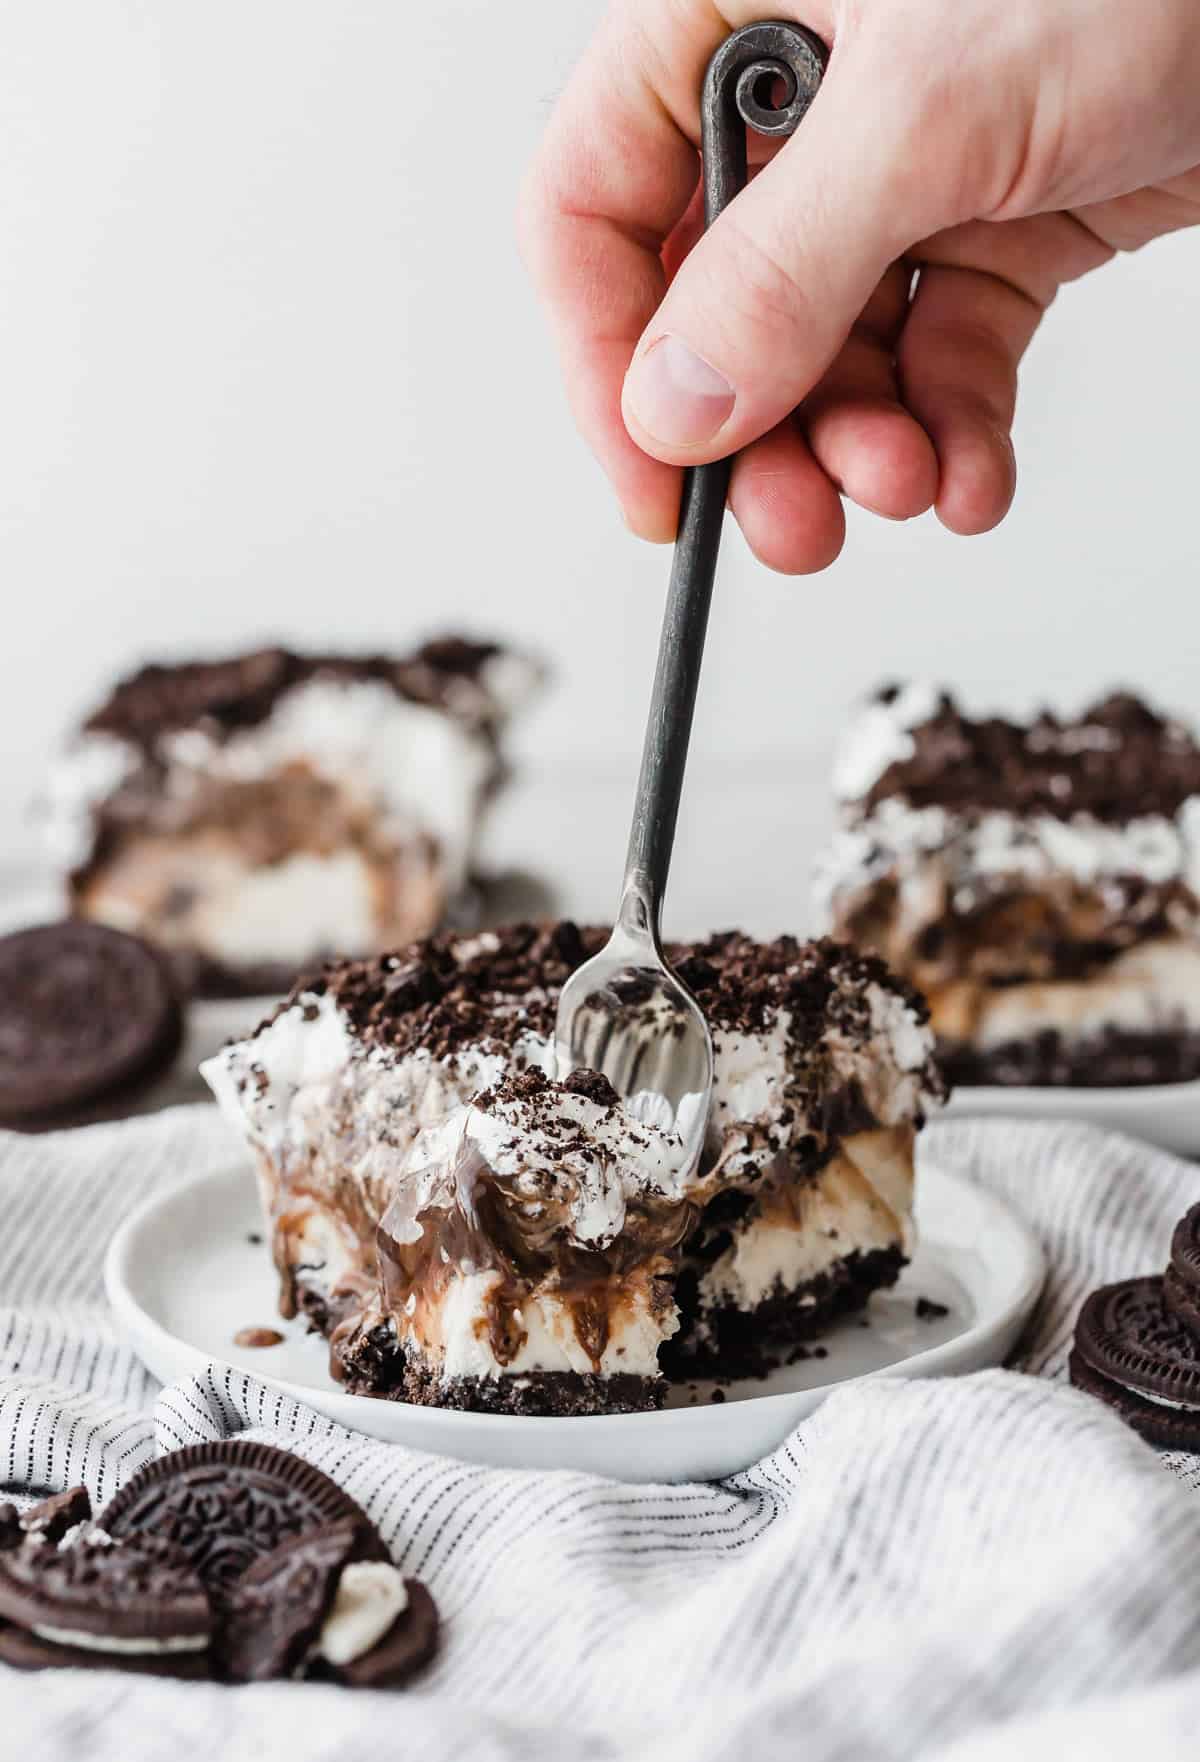 A hand stabbing a fork into the front of an Oreo Ice Cream Cake slice, on a white plate.